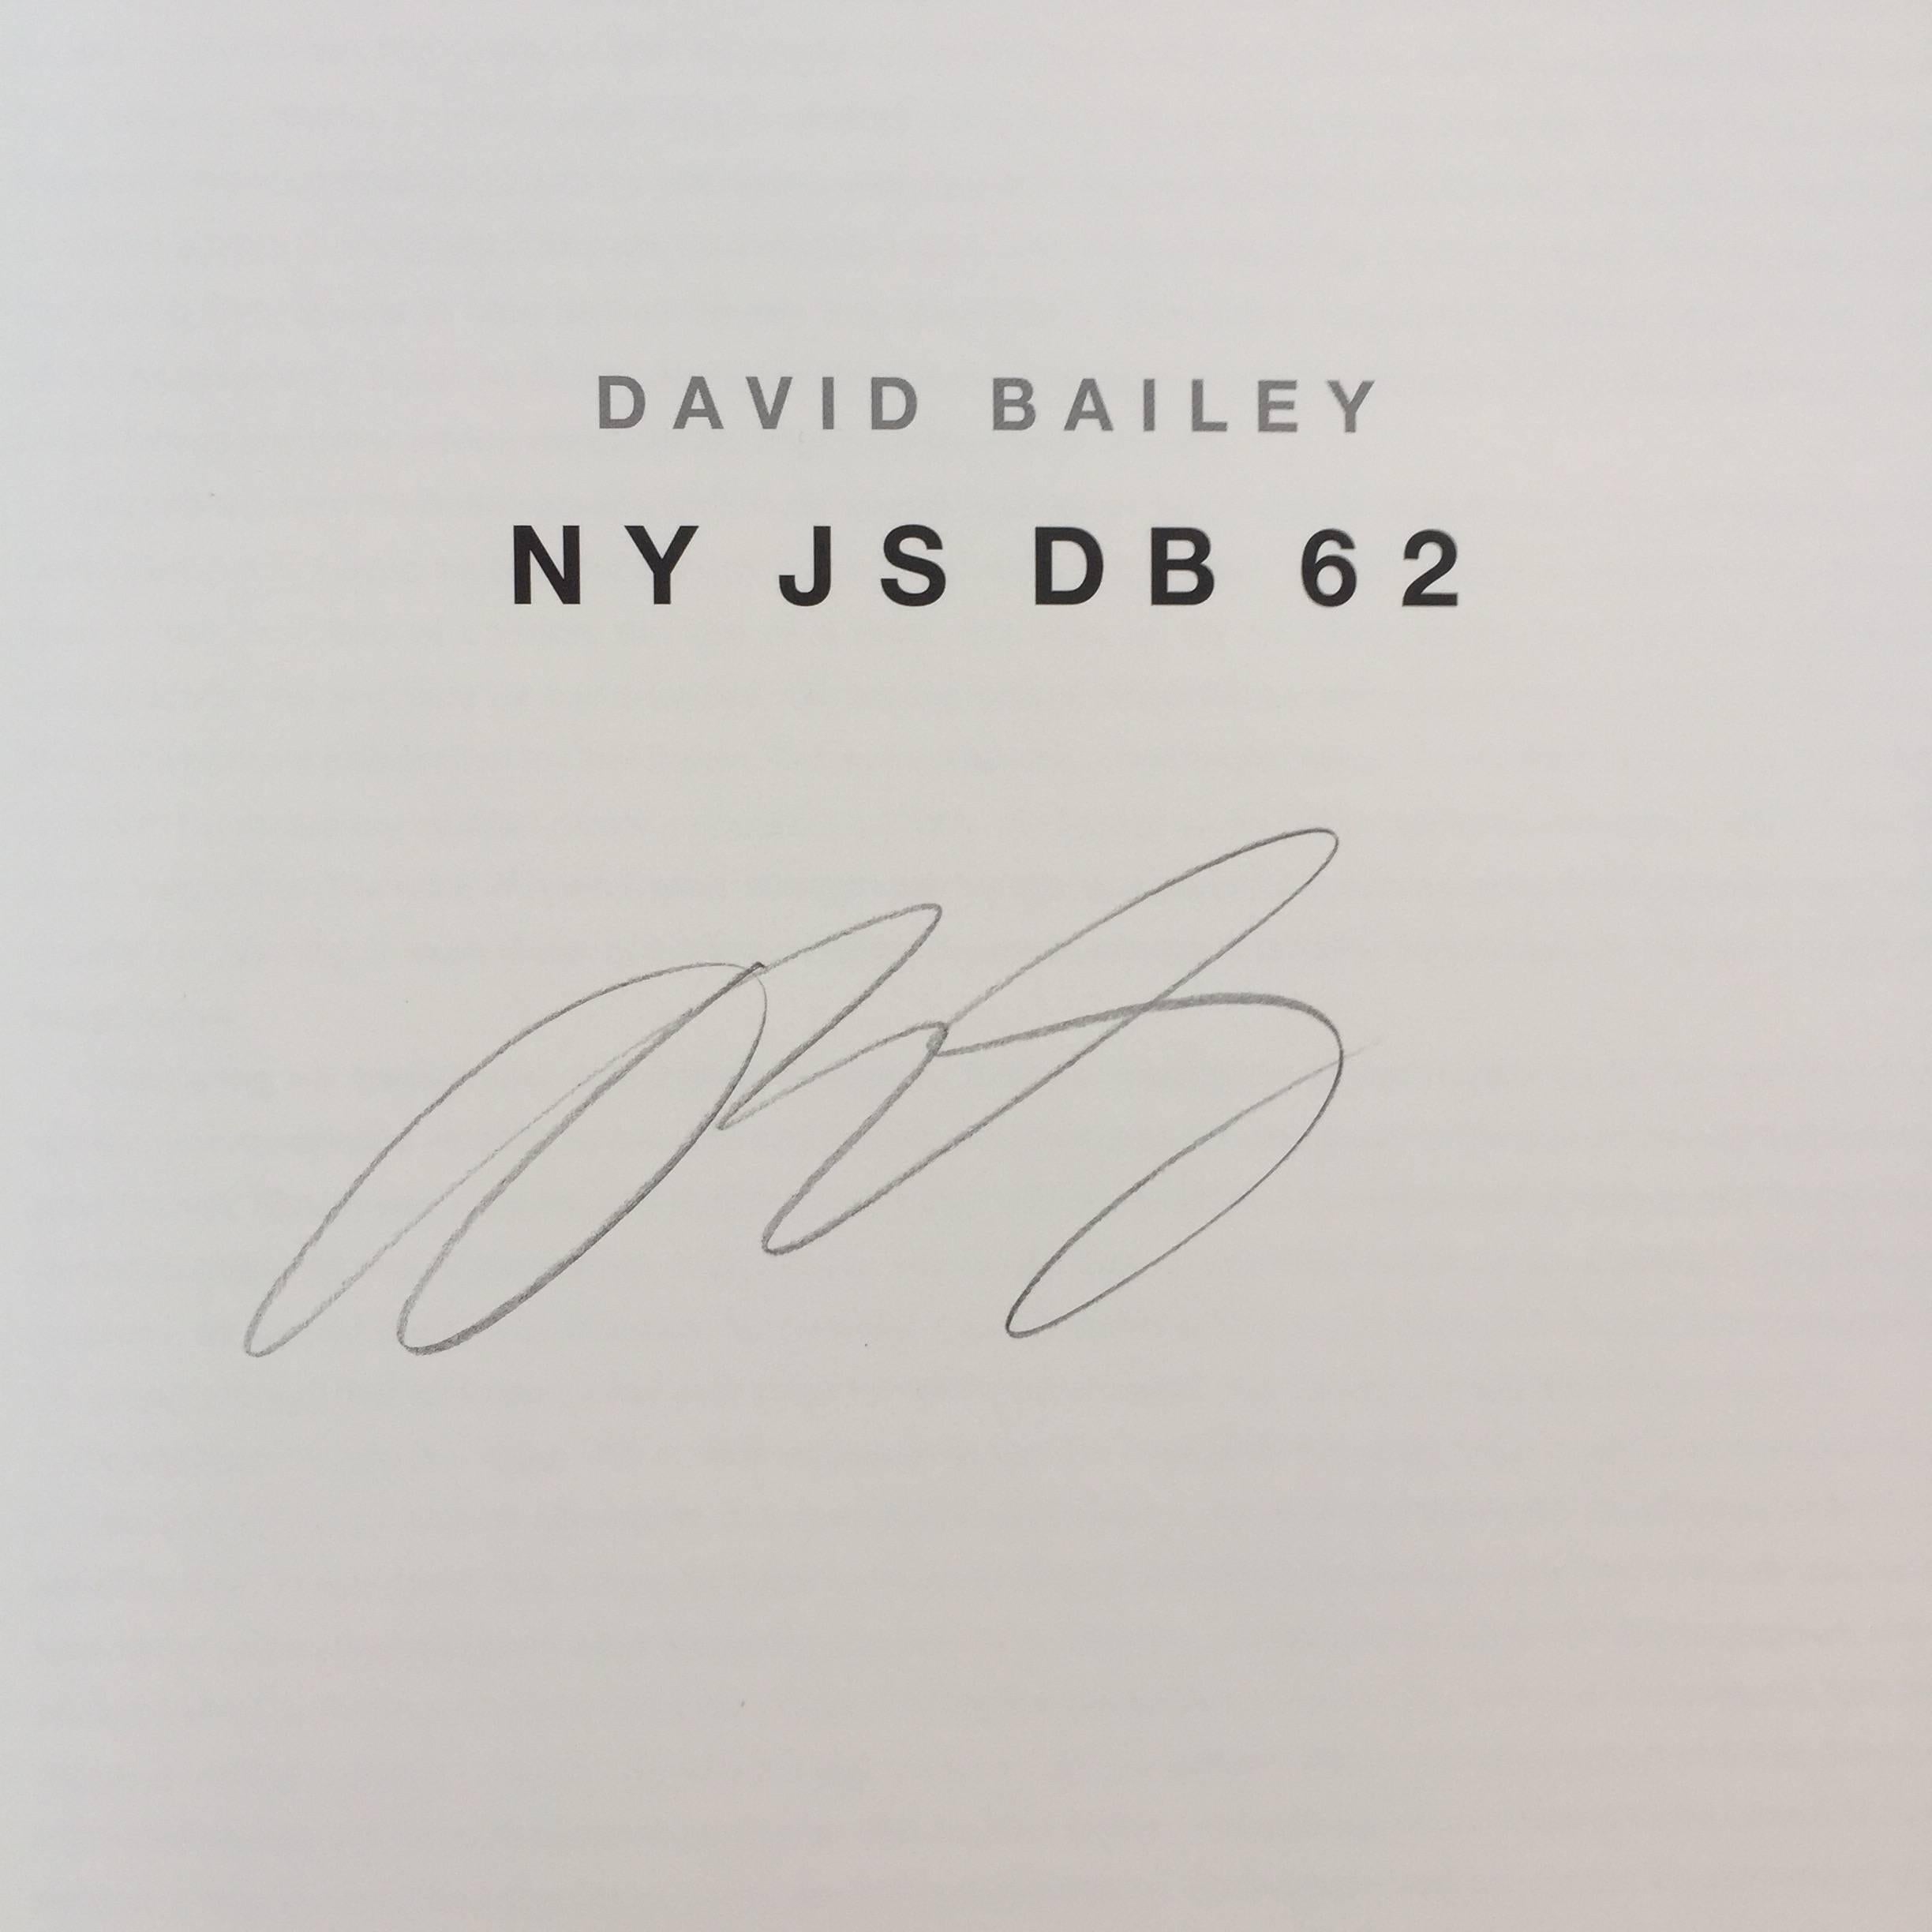 Signed first edition, published by Steidl, 2007.

NY JS DB 62 compiles photographs taken by David Bailey, one of the most successful British fashion and portrait photographers of his time. Embarking on a journey in his early twenties, whilst